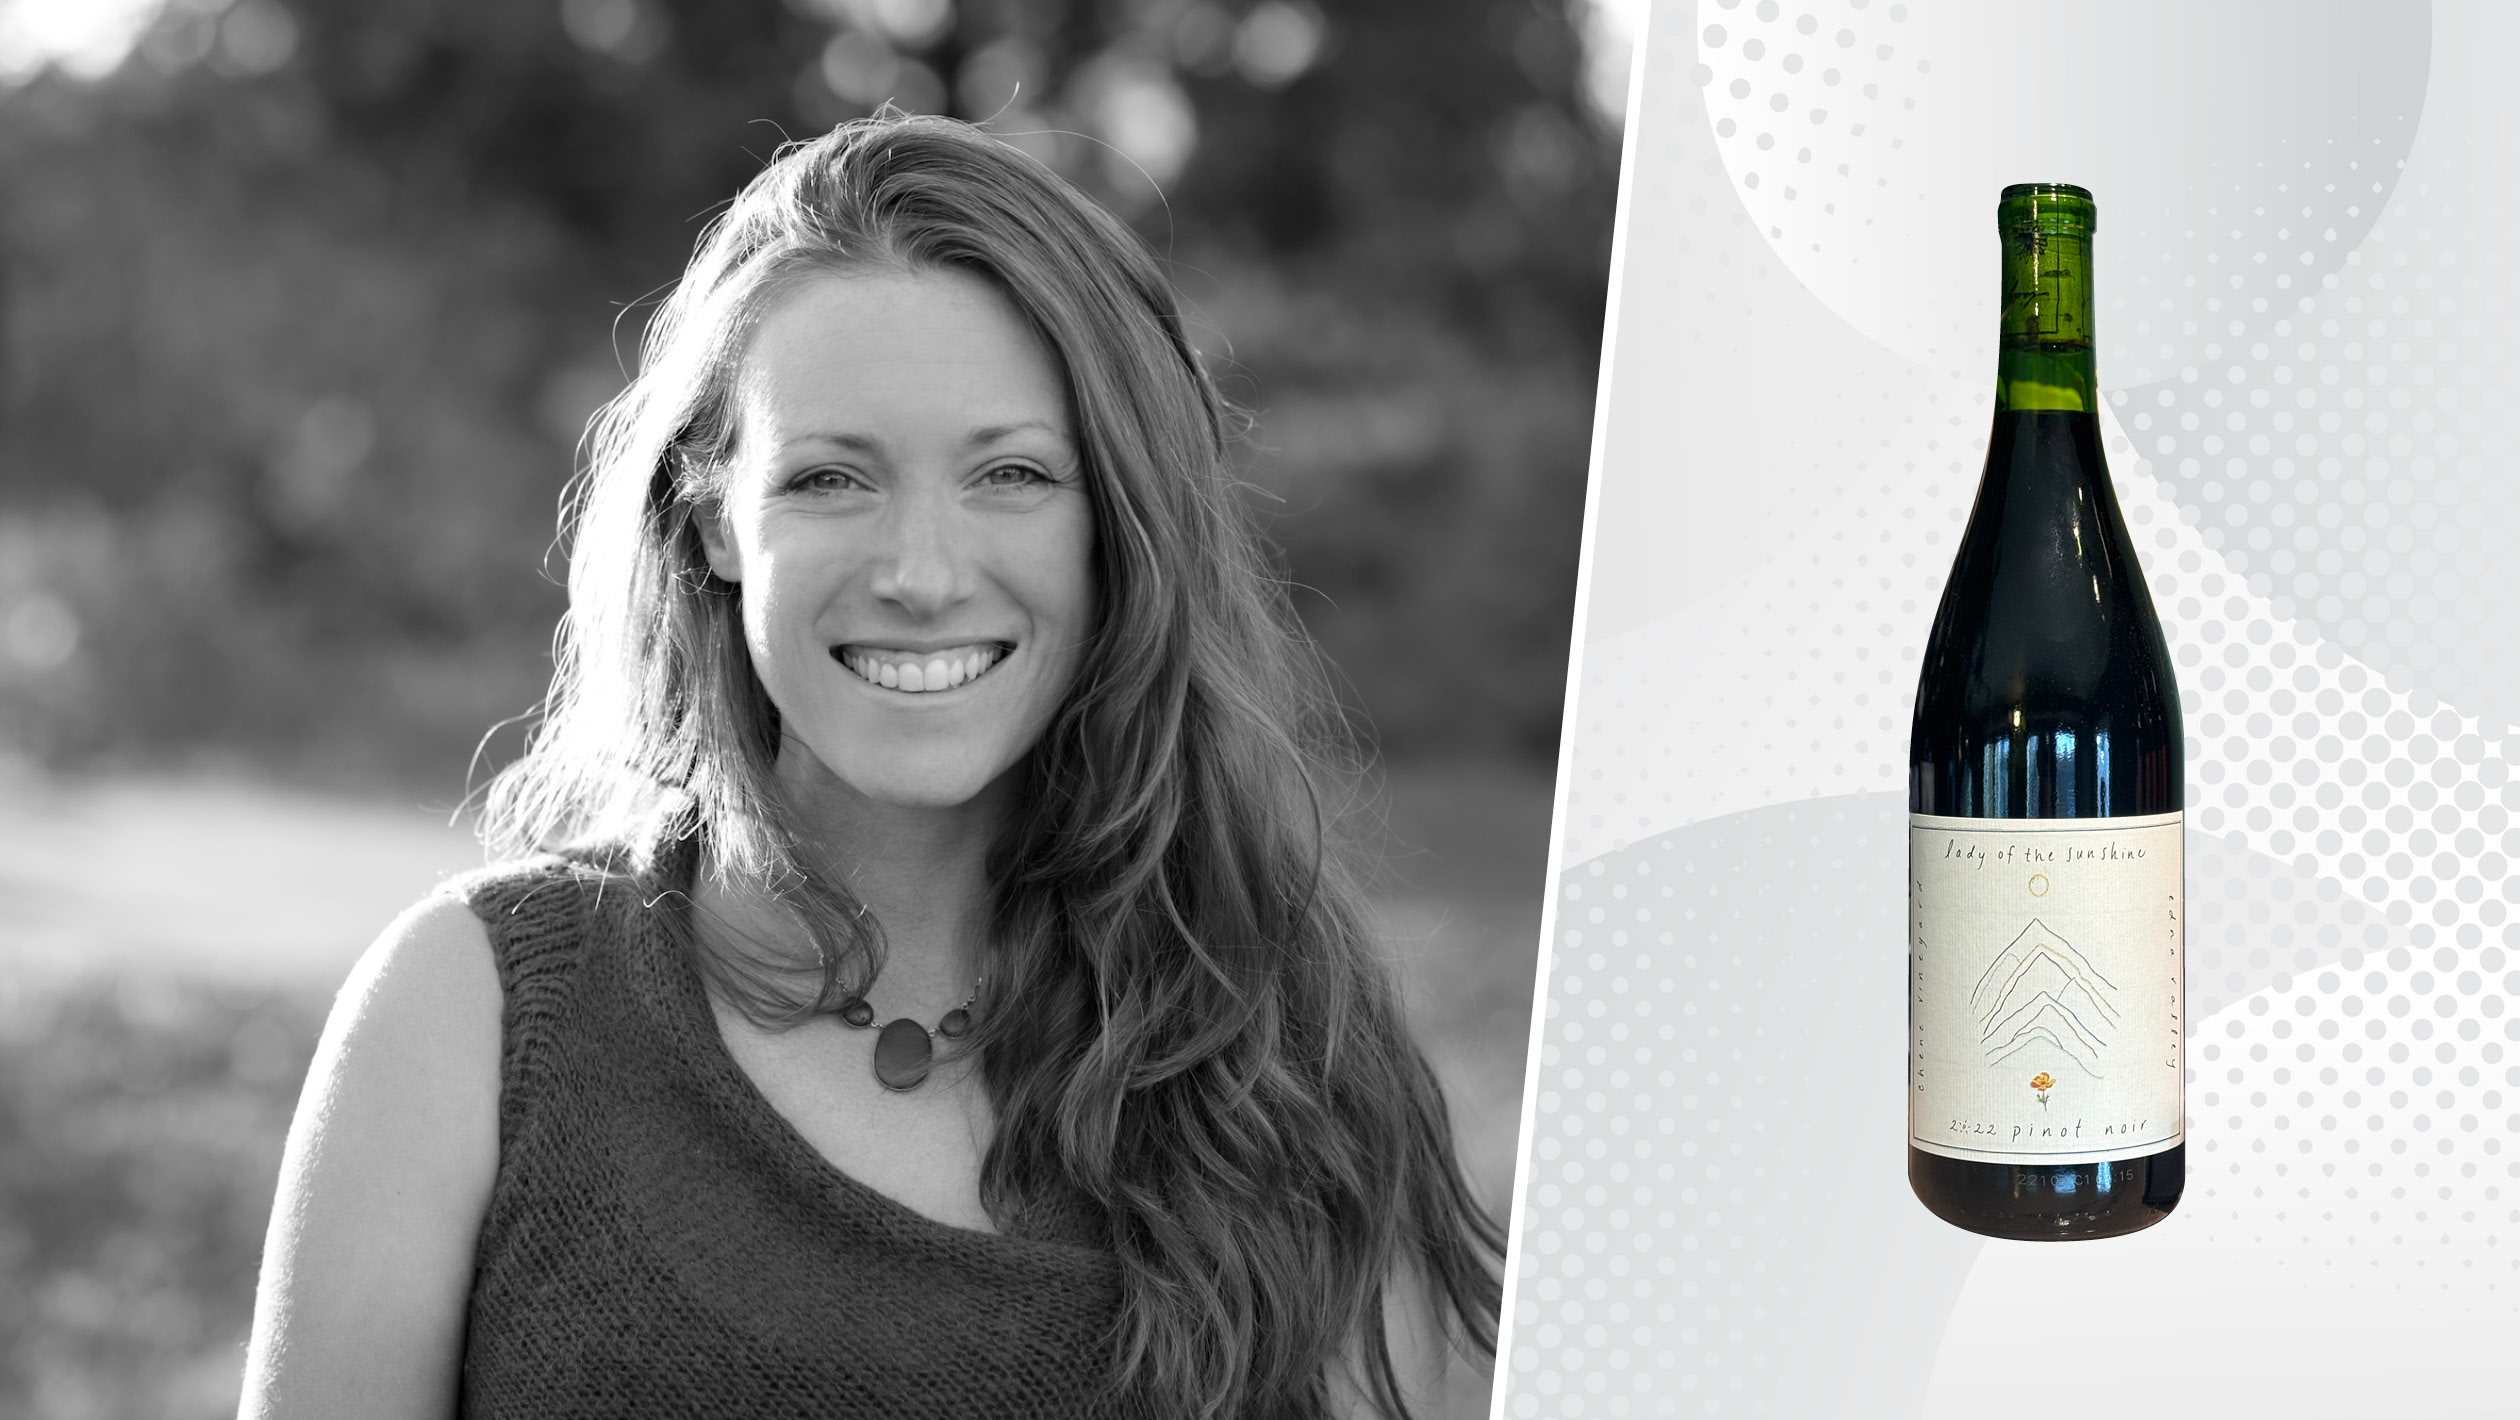 From left to right: Ashley Hausman, MW and the owner of So What Wine; Lady of the Sunshine ‘Chene Vineyard’ Pinot Noir. Photos courtesy of Ashley Hausman.